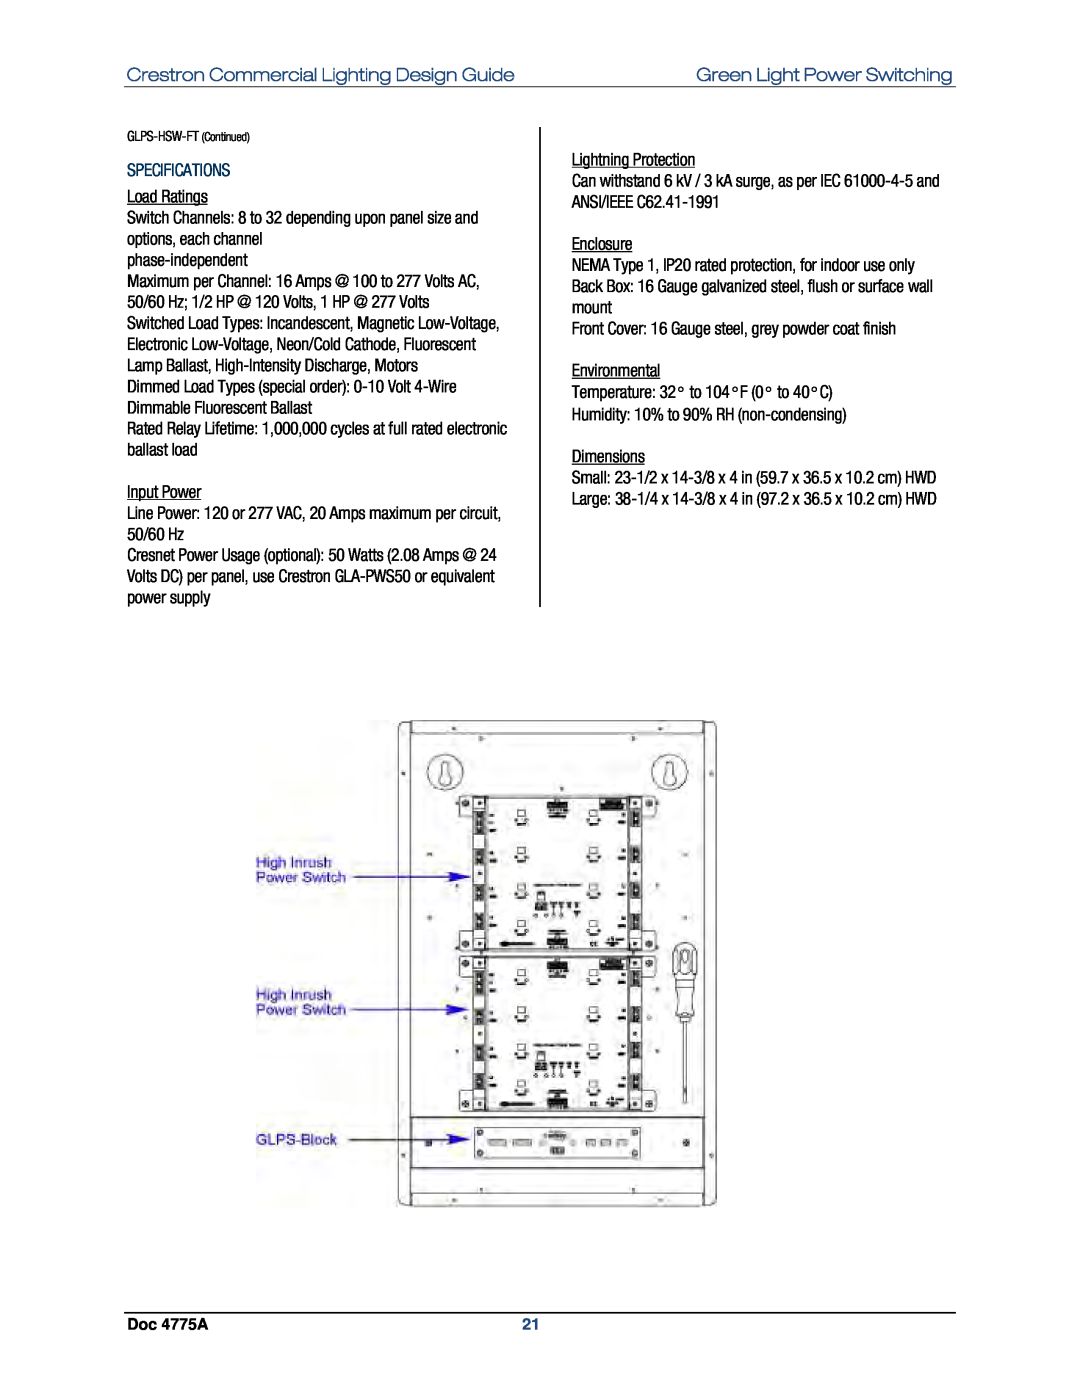 Crestron electronic GLPS-SW, IPAC-GL1 Crestron Commercial Lighting Design Guide, Green Light Power Switching, Load Ratings 